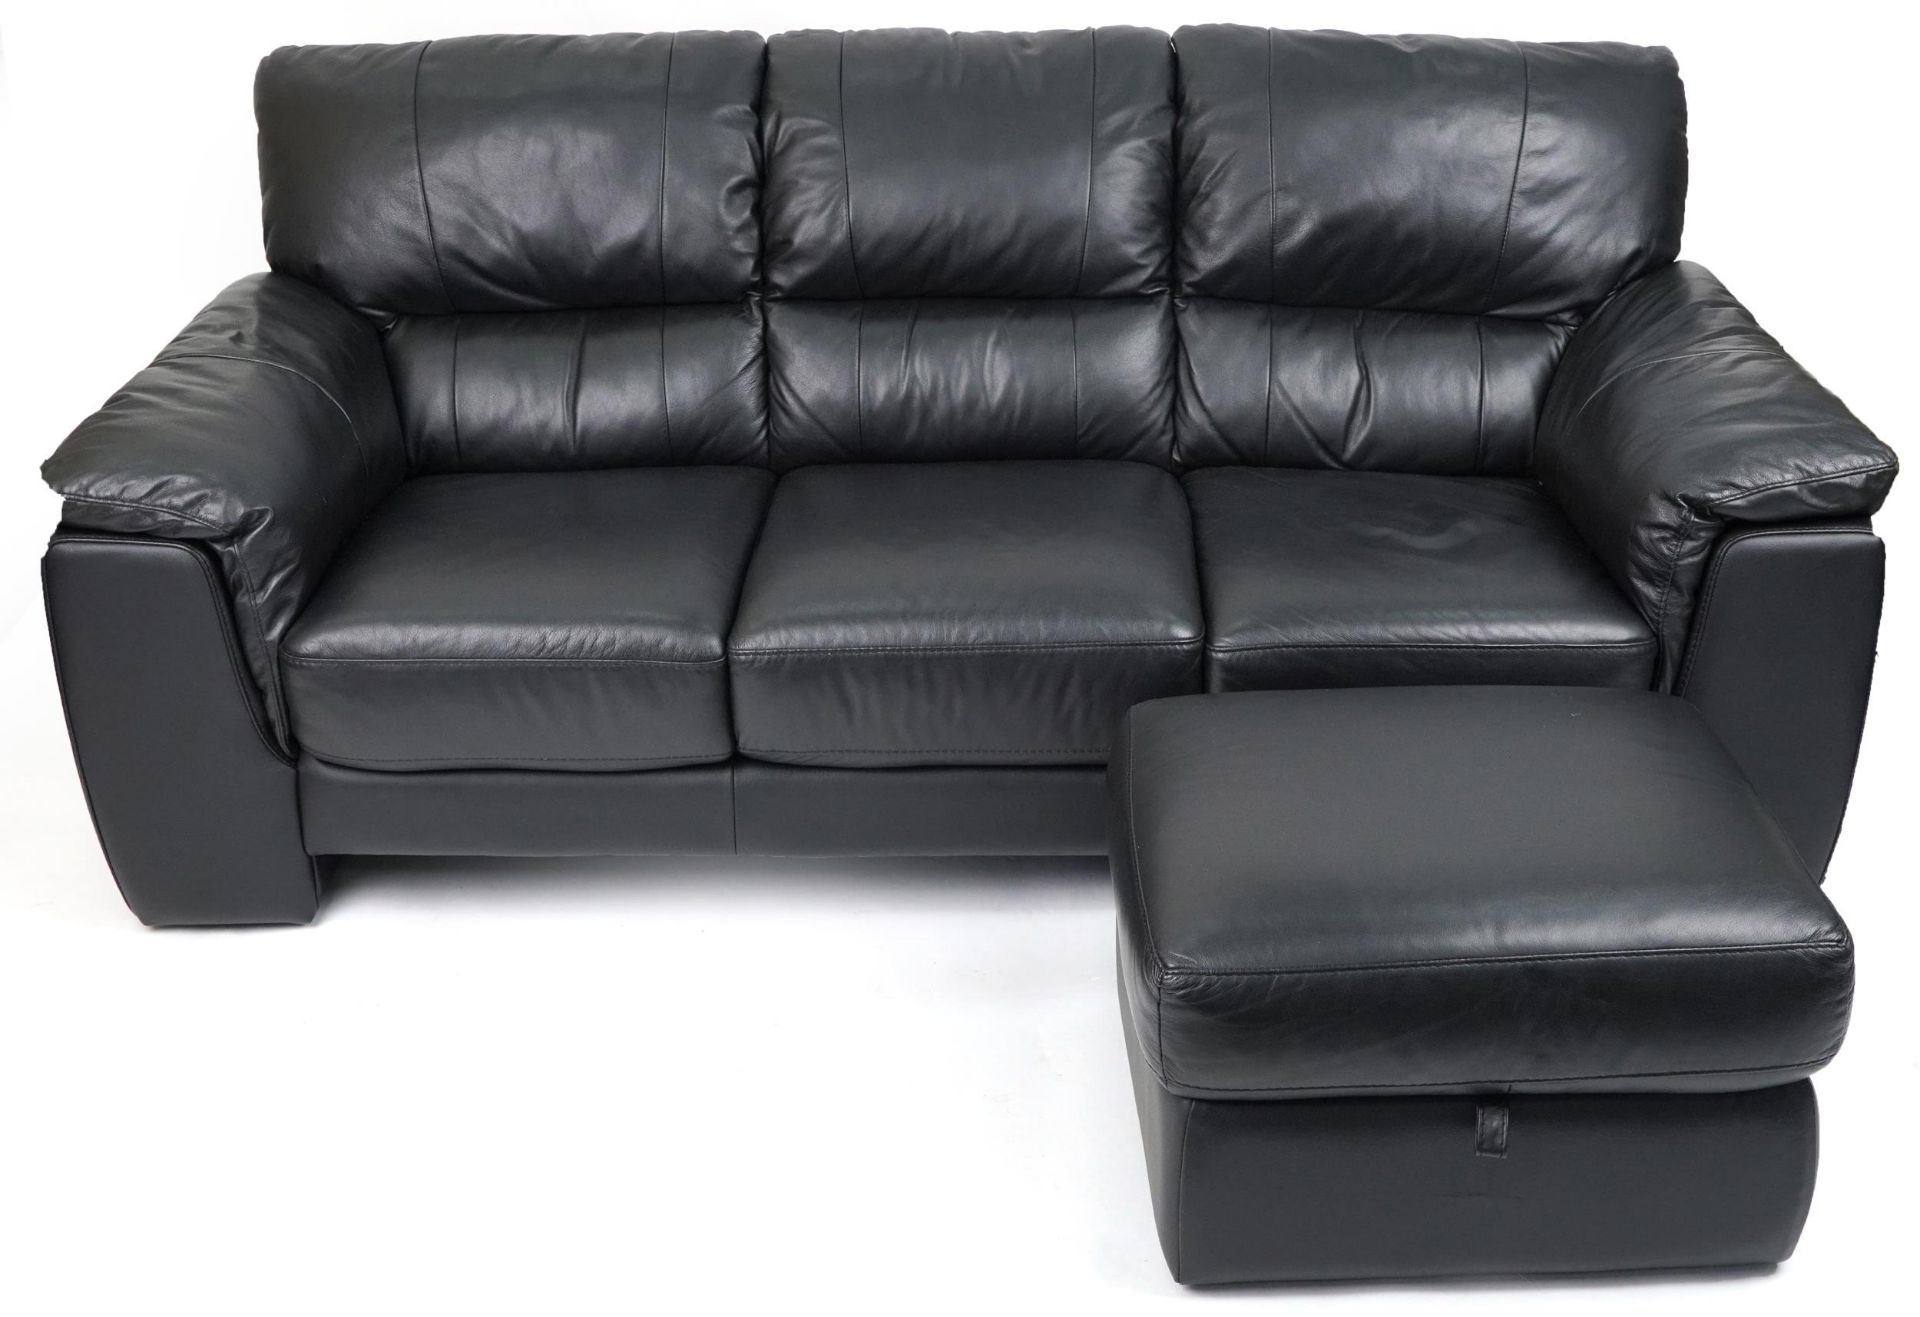 Contemporary three seater settee with black leather upholstery and footstool, the settee 90cm H x